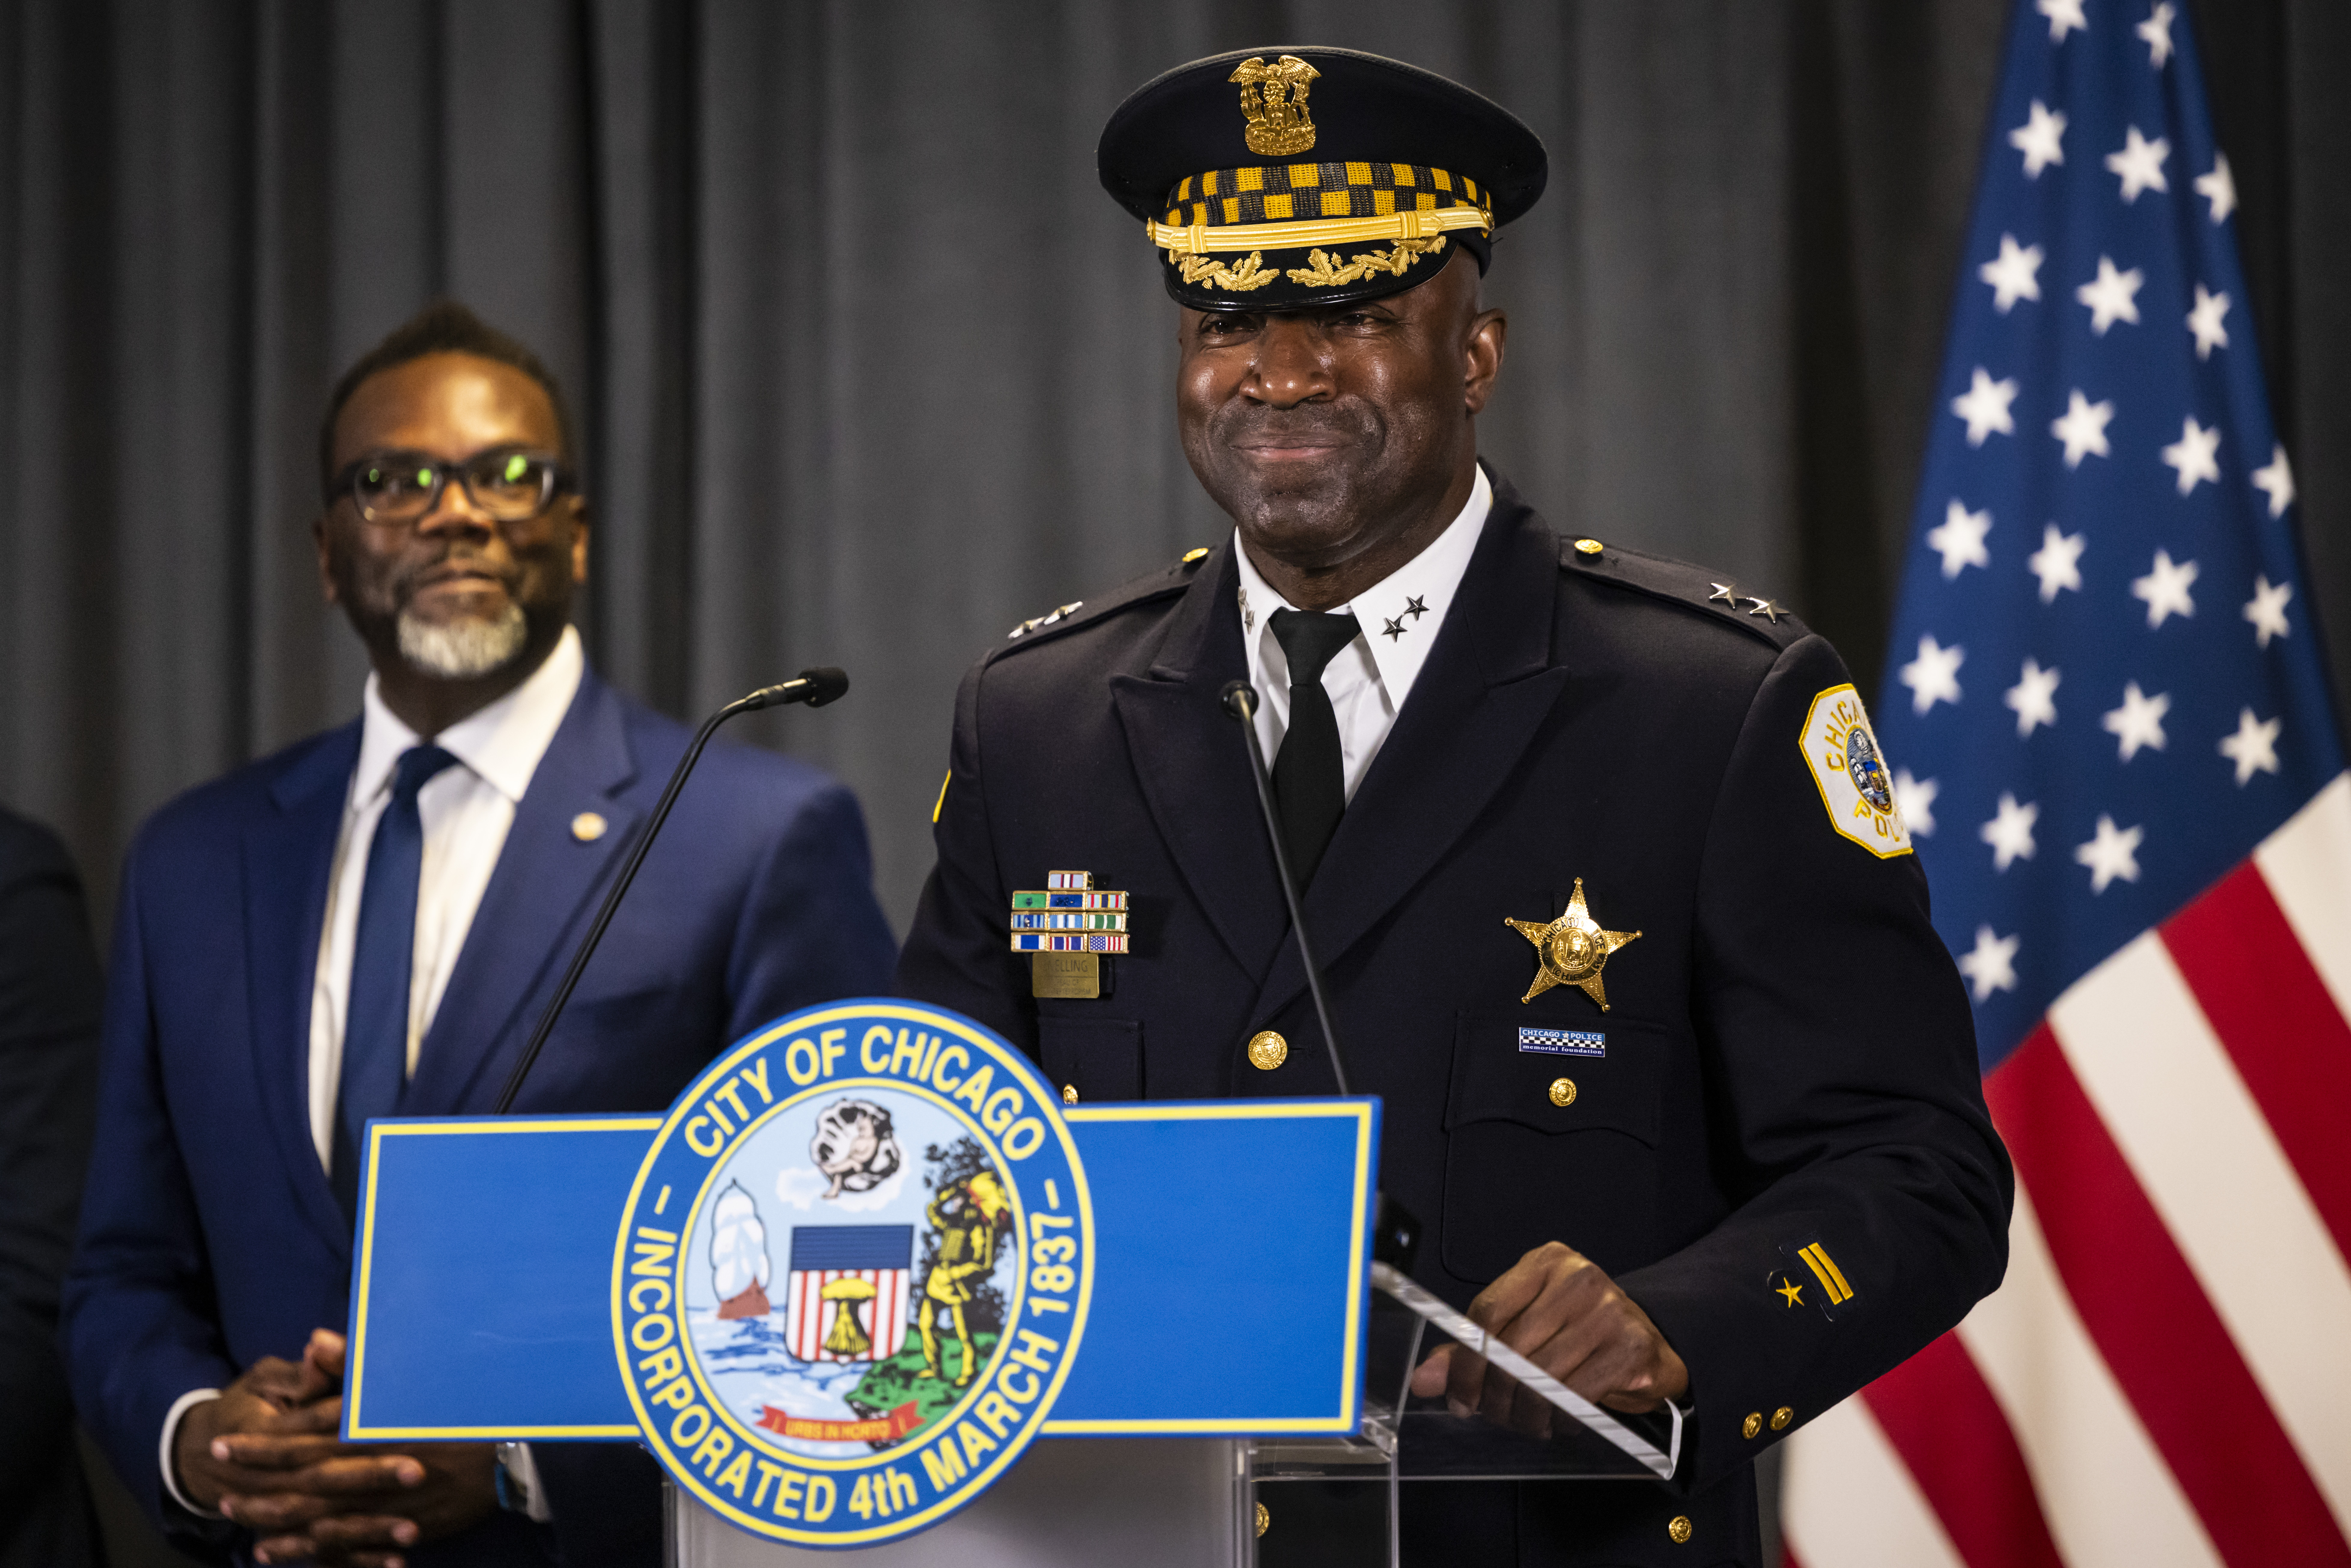 Mayor Brandon Johnson looks on as Chief Larry Snelling speaks during a news conference at City Hall...